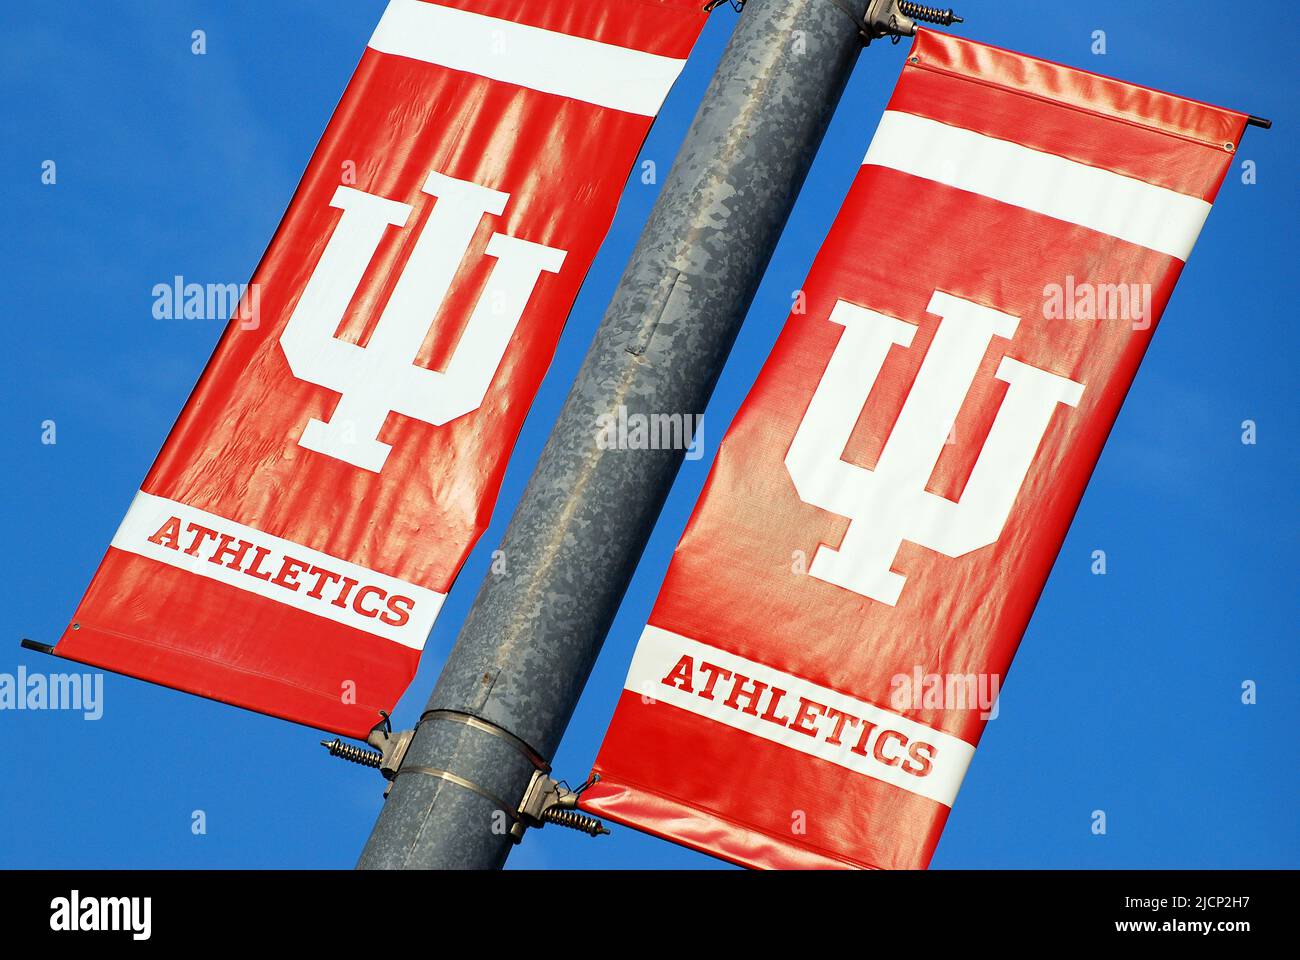 Red and white banners for the Indiana University Athletic Department hang from the street lamps of the parking lot of the schools football stadium Stock Photo